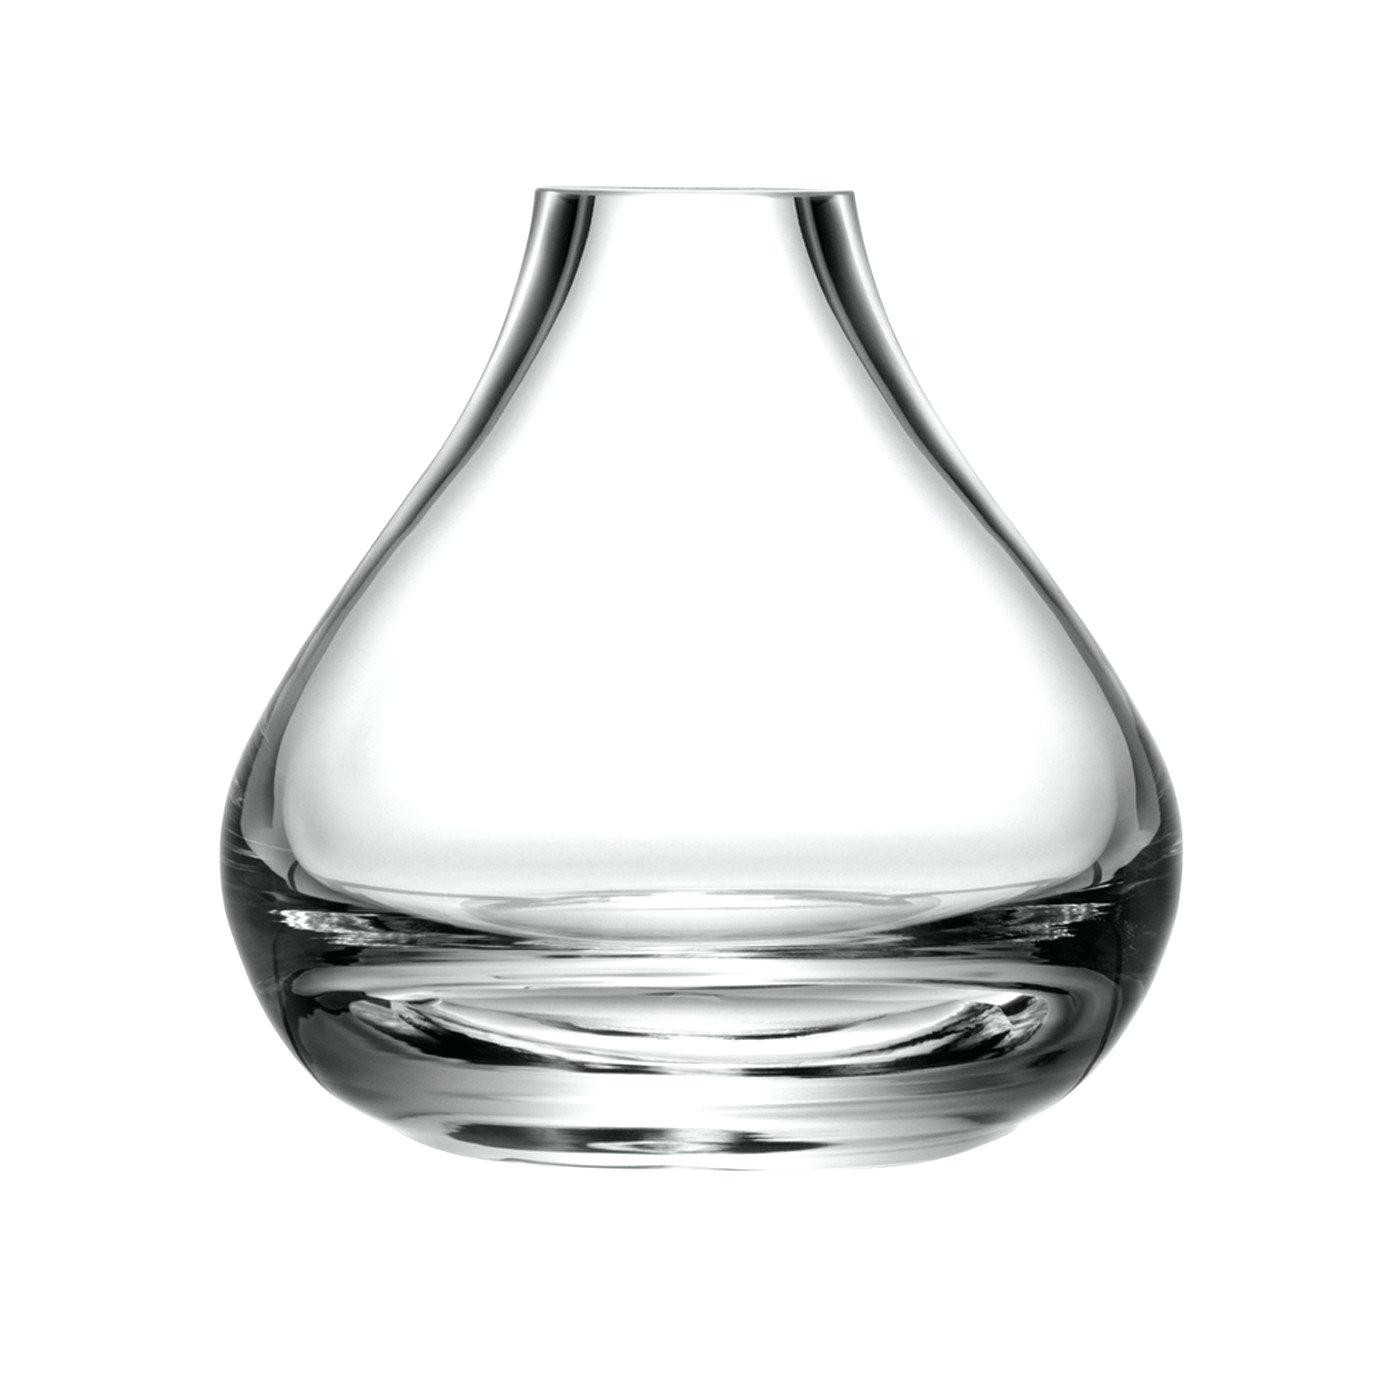 large clear glass vases for the floor of walmart clear glass vases www topsimages com regarding cylinder vases walmart glass vase centerpiece ideas tall sanalee info jpg 1400x1400 walmart clear glass vases